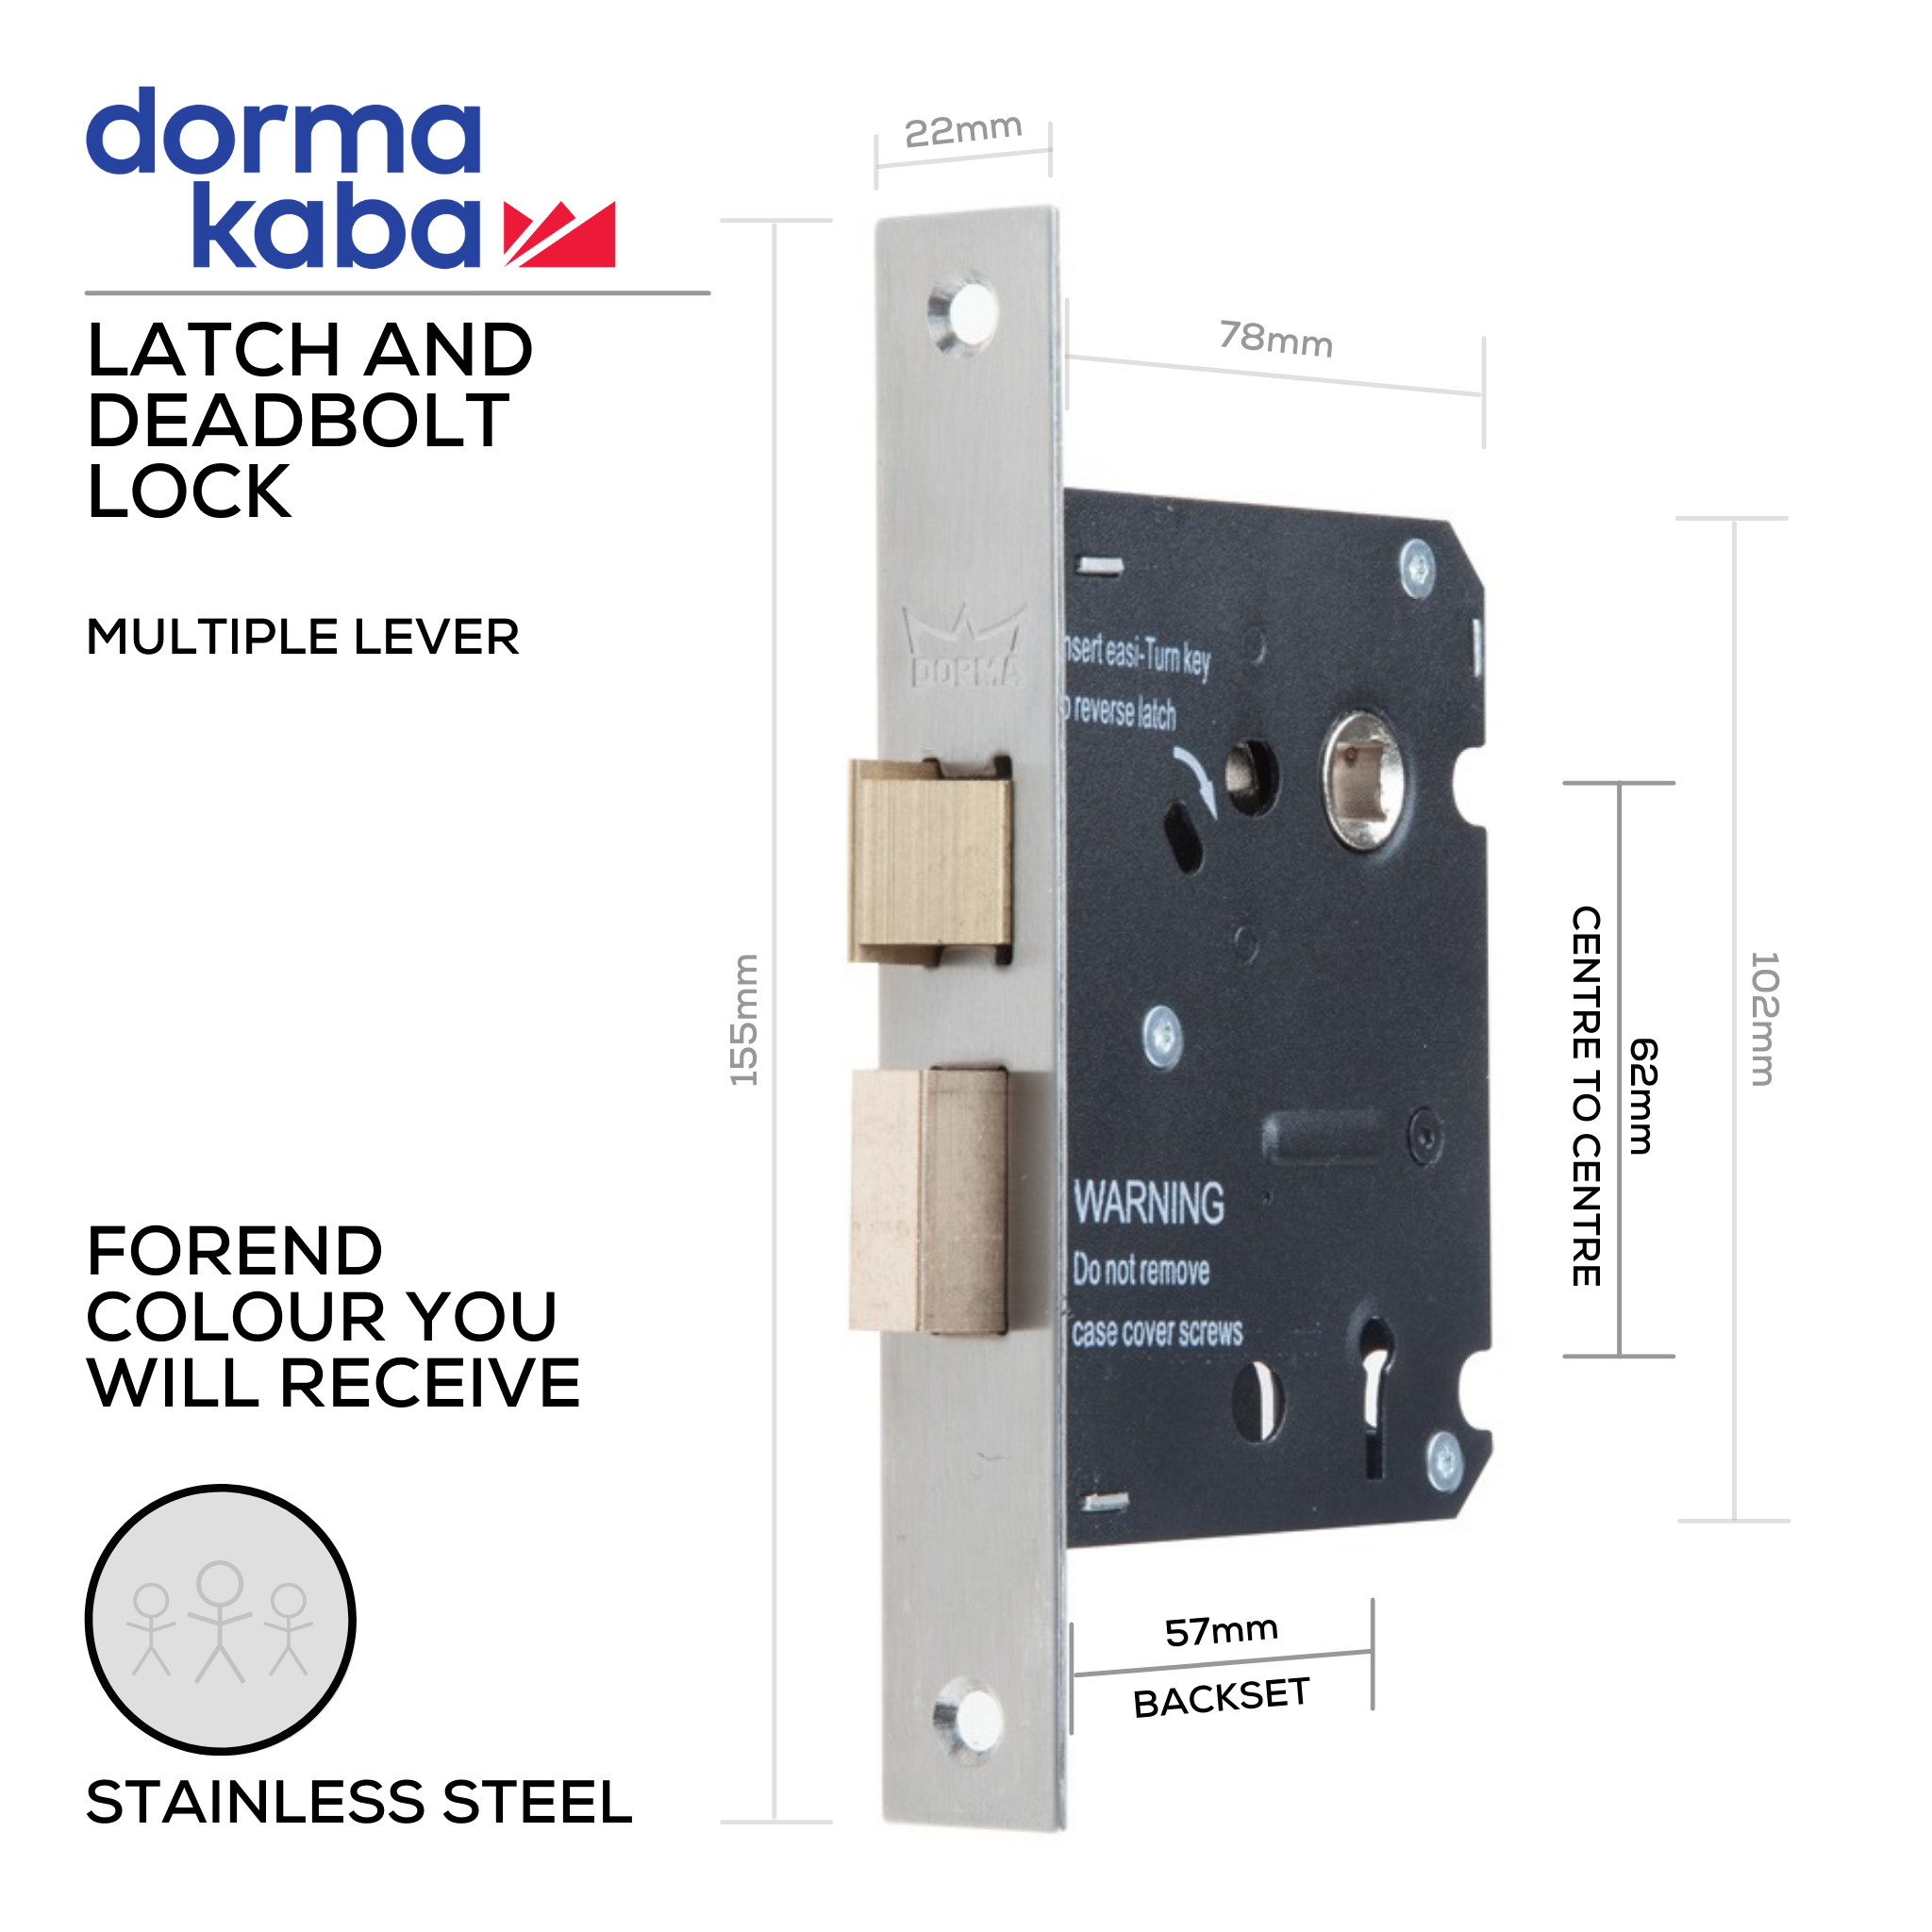 D034S Stainless Steel, Multiple Lever, Latch & Deadbolt Lock, Euro Cylinder, Excluding Cylinder, 57mm (Backset) x 62mm (ctc), Stainless Steel, DORMAKABA